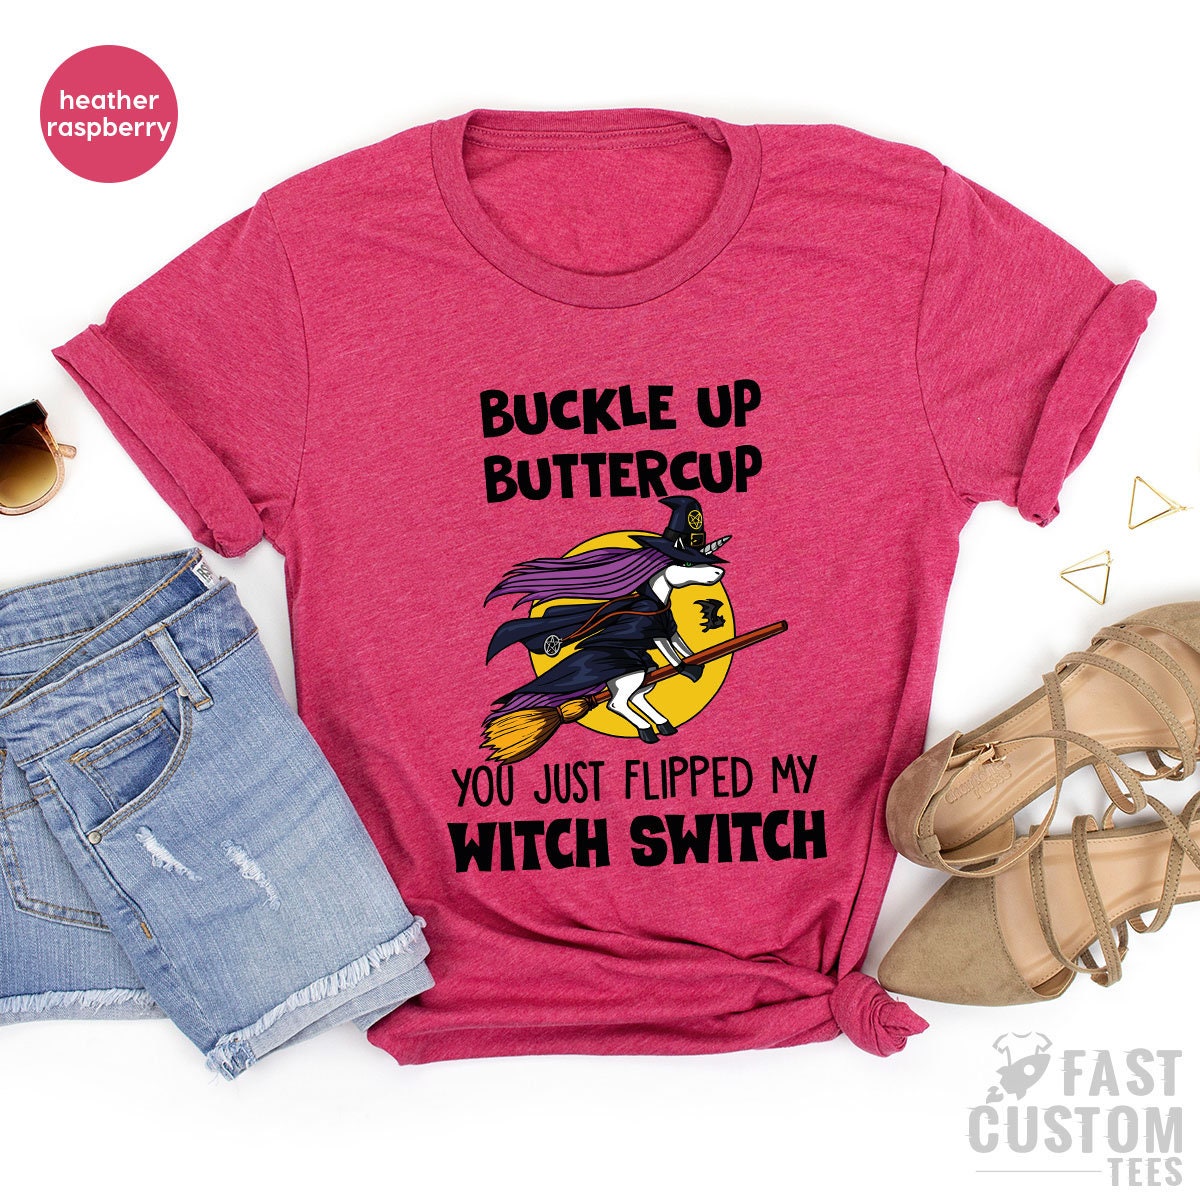 Halloween Witch Shirt, Fall T Shirt, Buckle Up Buttercup You Just Flipped My Witch Switch TShirt, Witchy T-Shirt, Halloween Gift - Fastdeliverytees.com